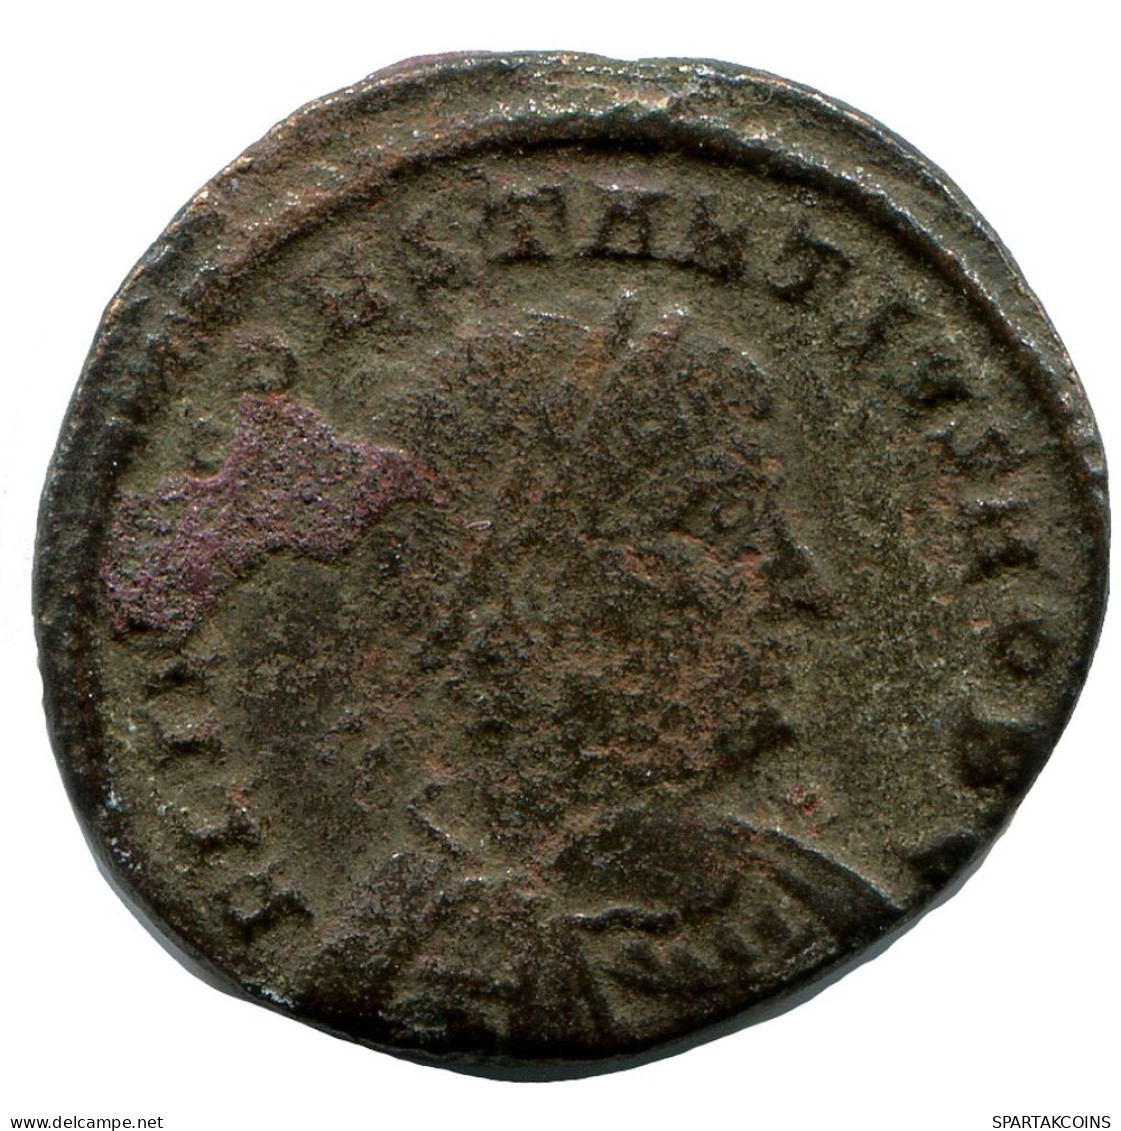 CONSTANTIUS II ALEKSANDRIA FROM THE ROYAL ONTARIO MUSEUM #ANC10478.14.U.A - The Christian Empire (307 AD Tot 363 AD)